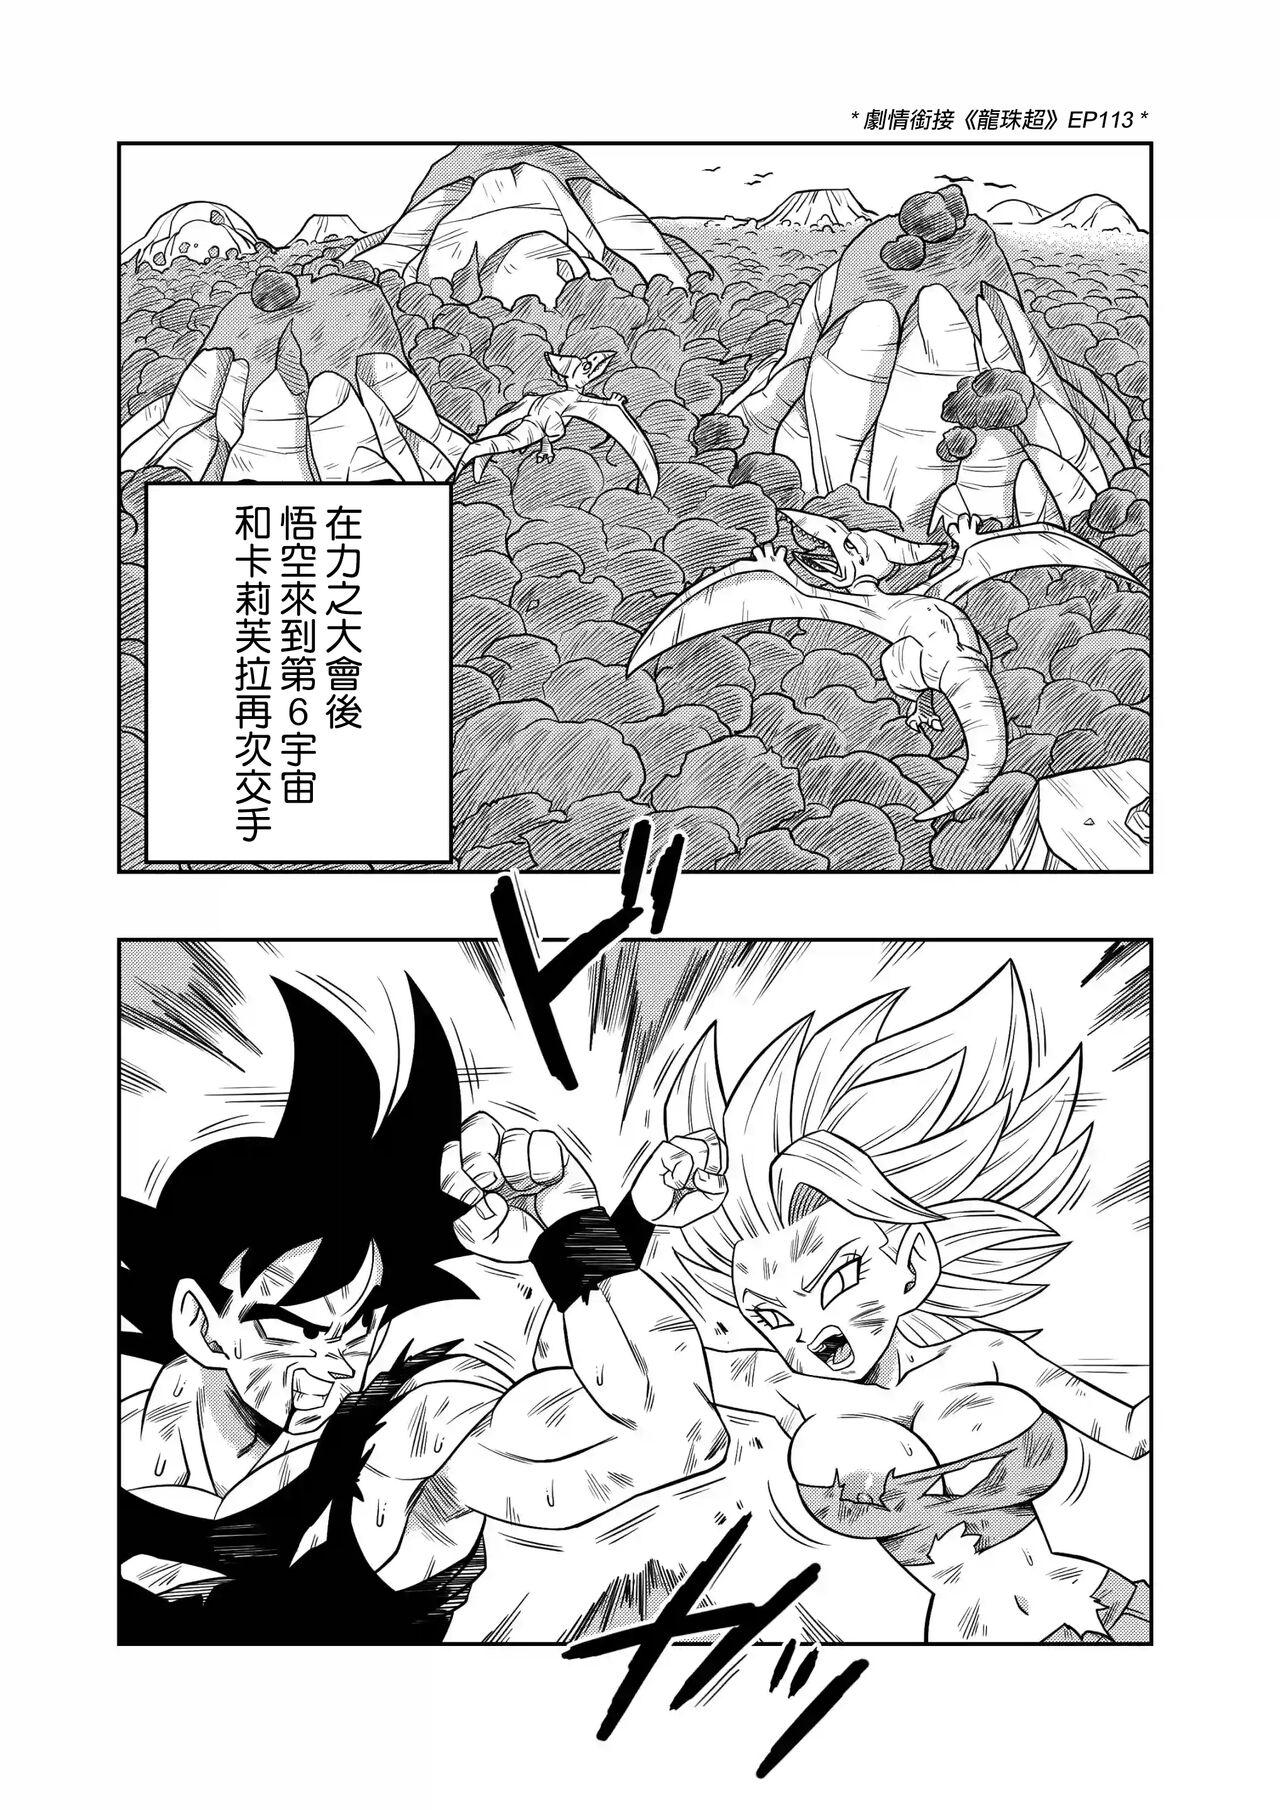 Mms Fight in the 6th Universe!!! - Dragon ball super Imvu - Page 3